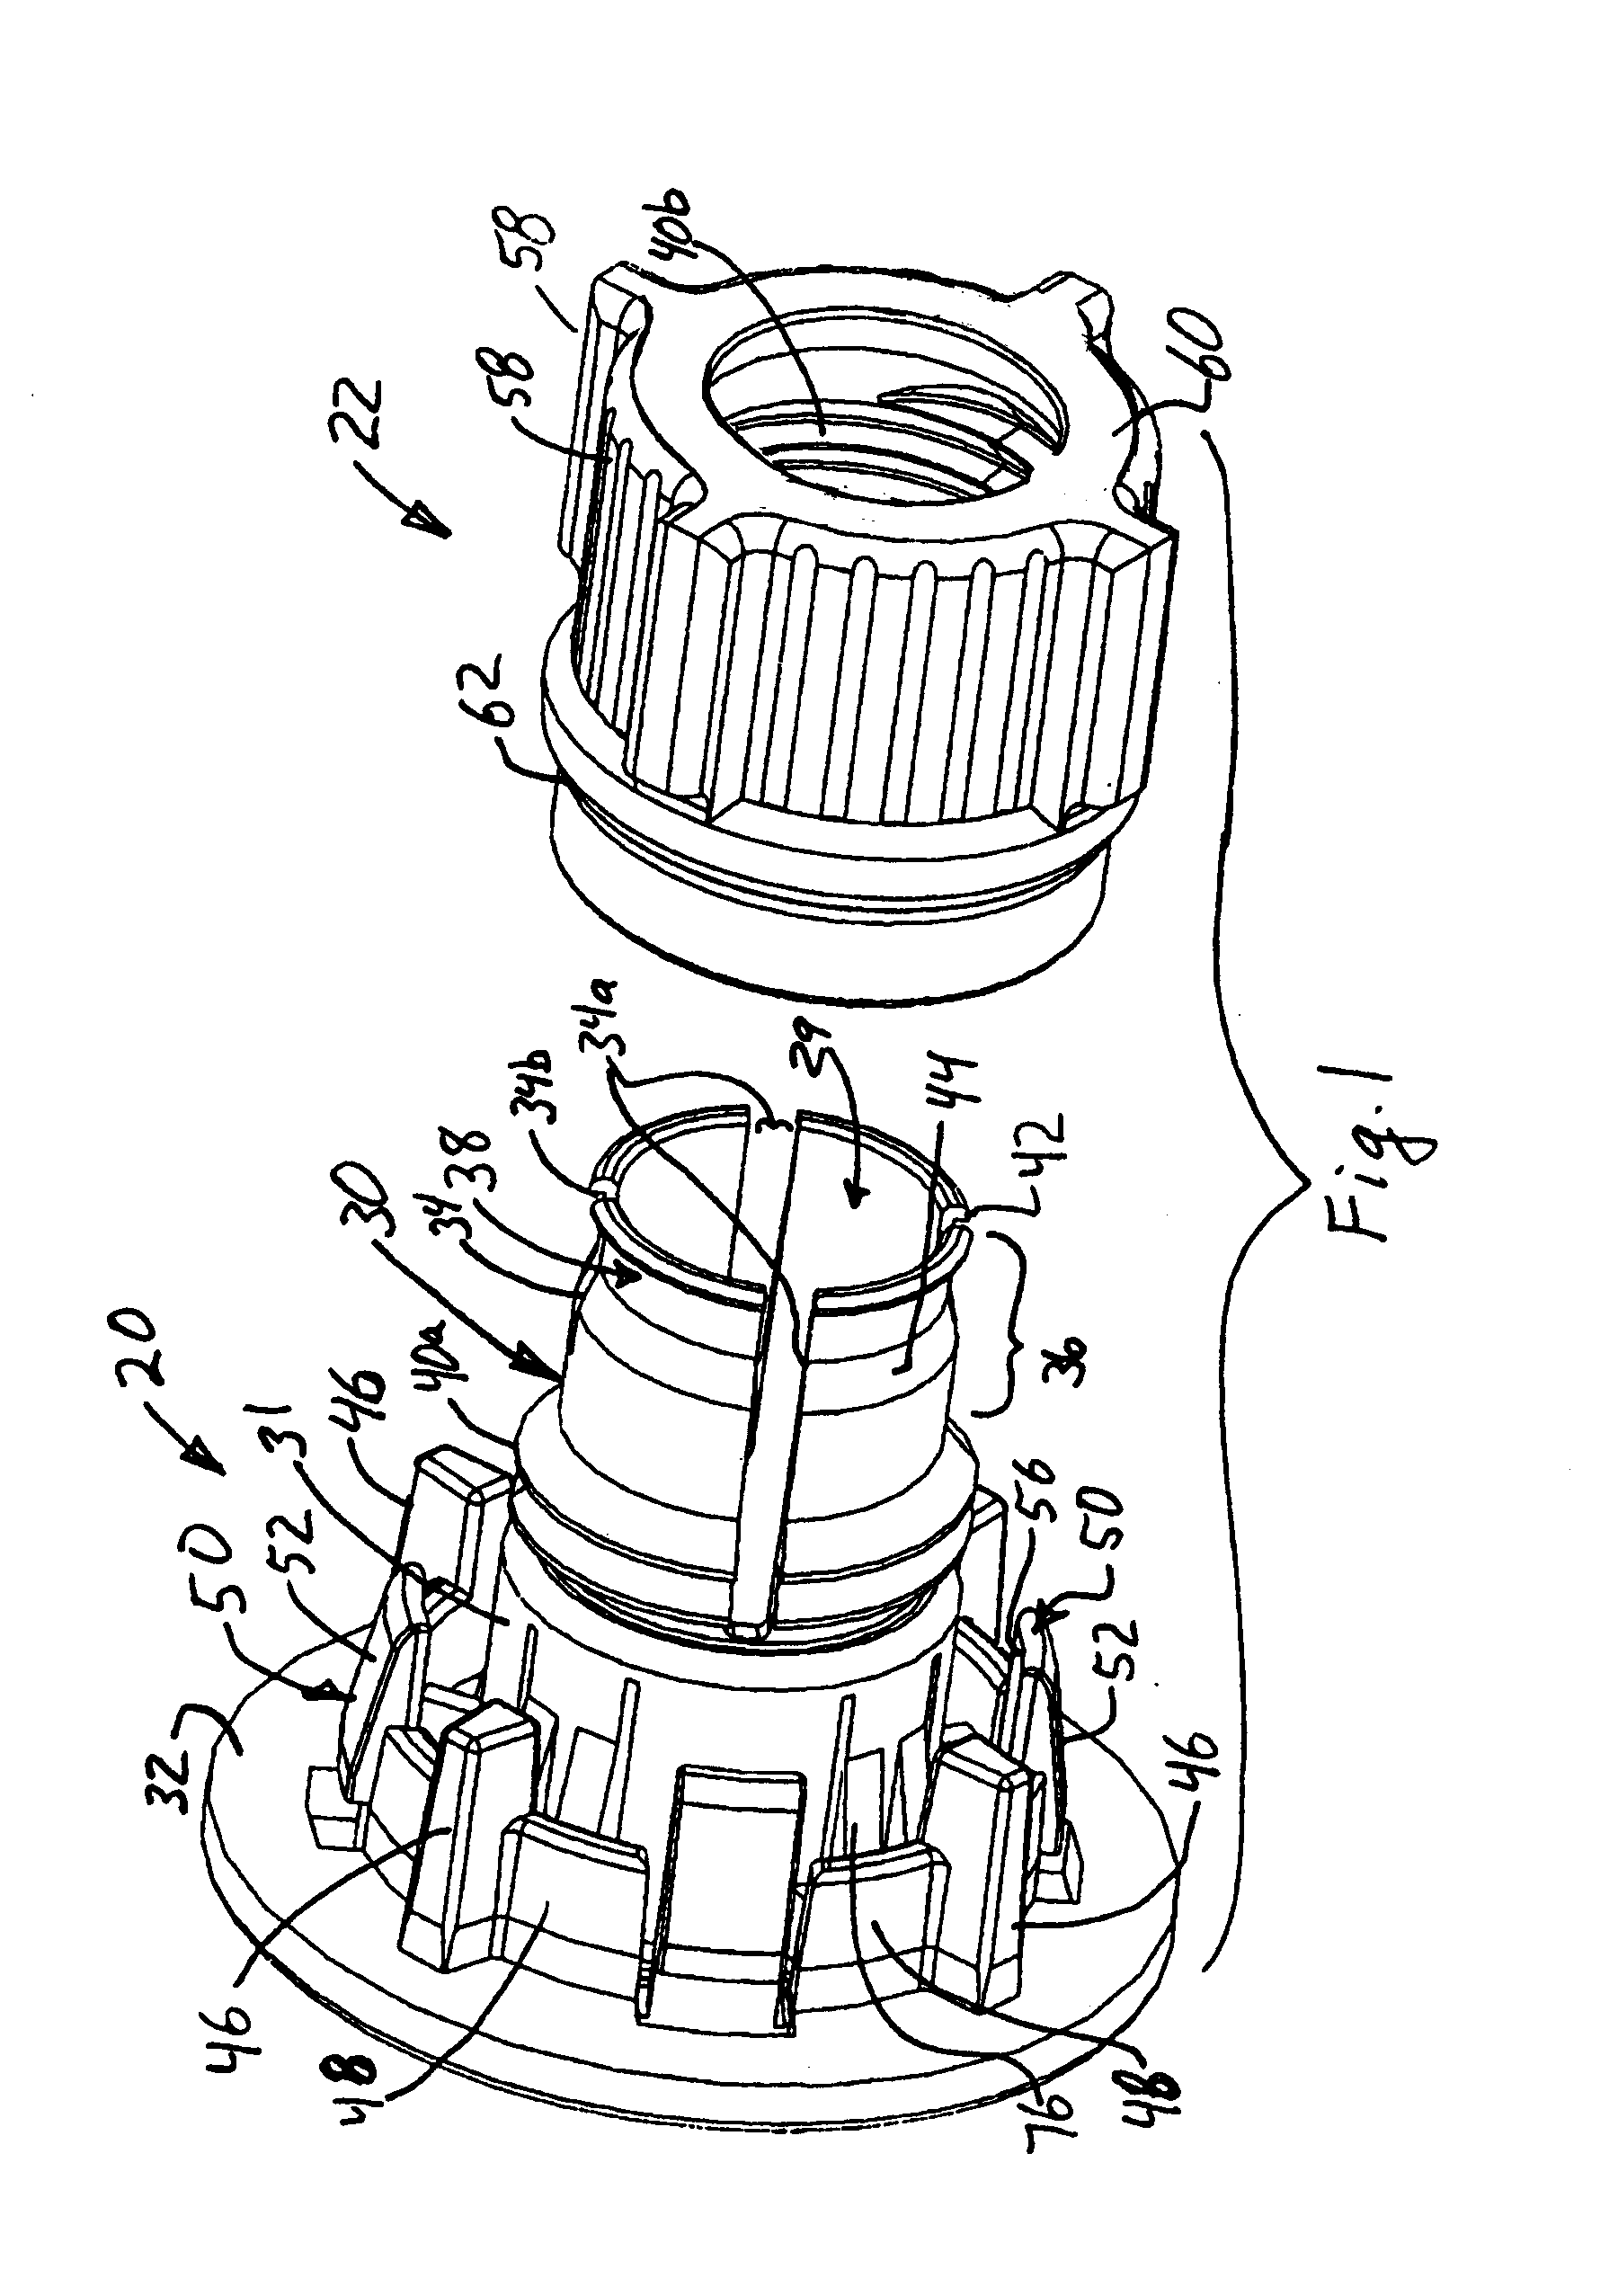 Anti-rotation pipe locator and holder